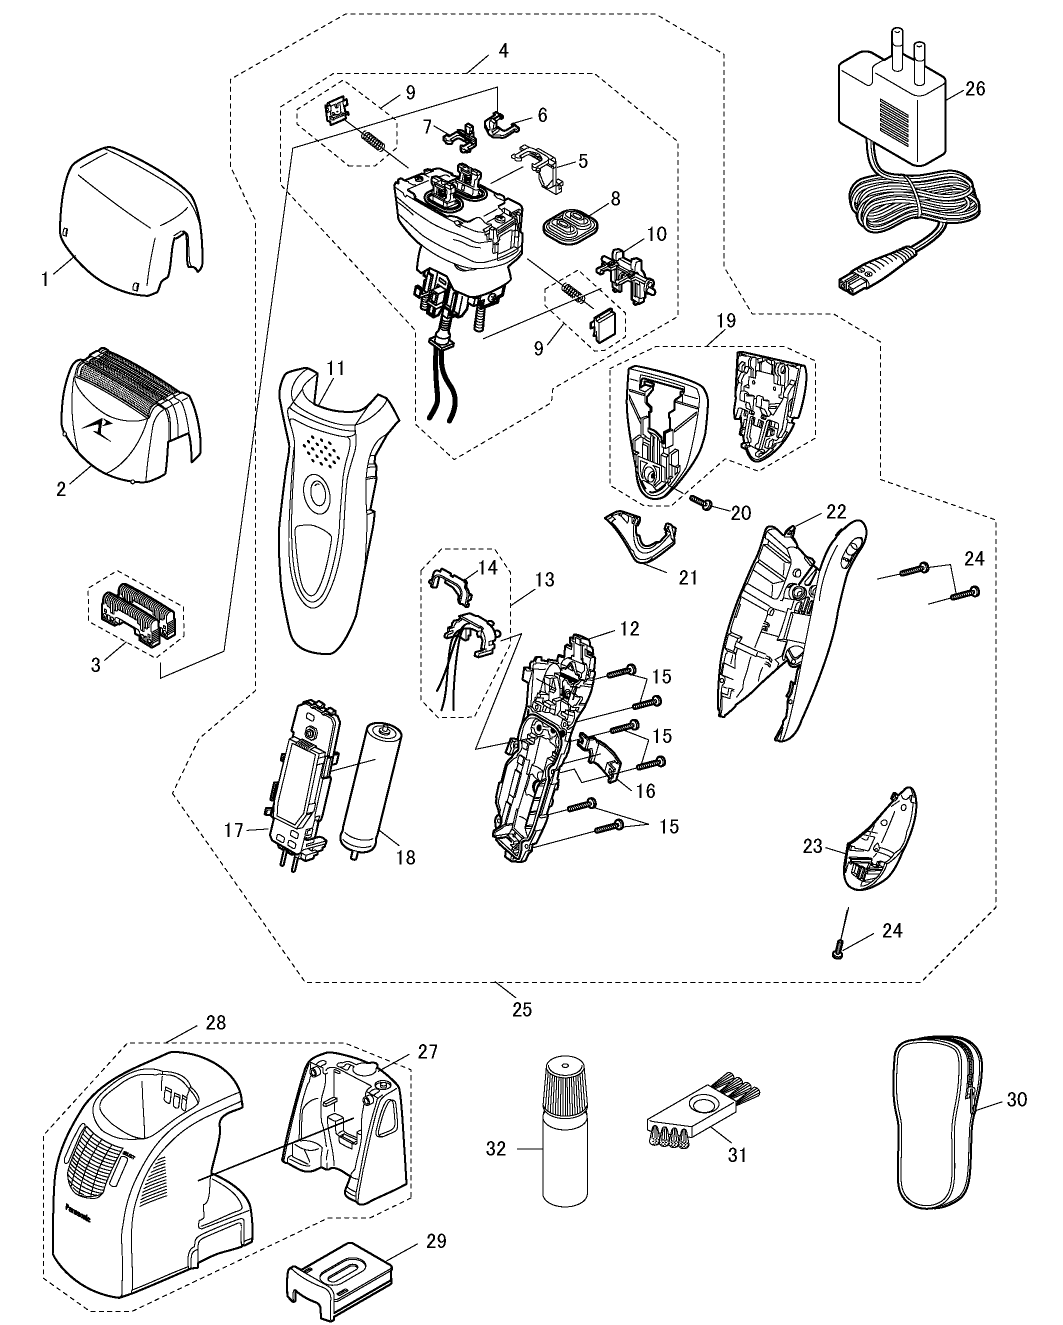 ES-8249: Exploded View